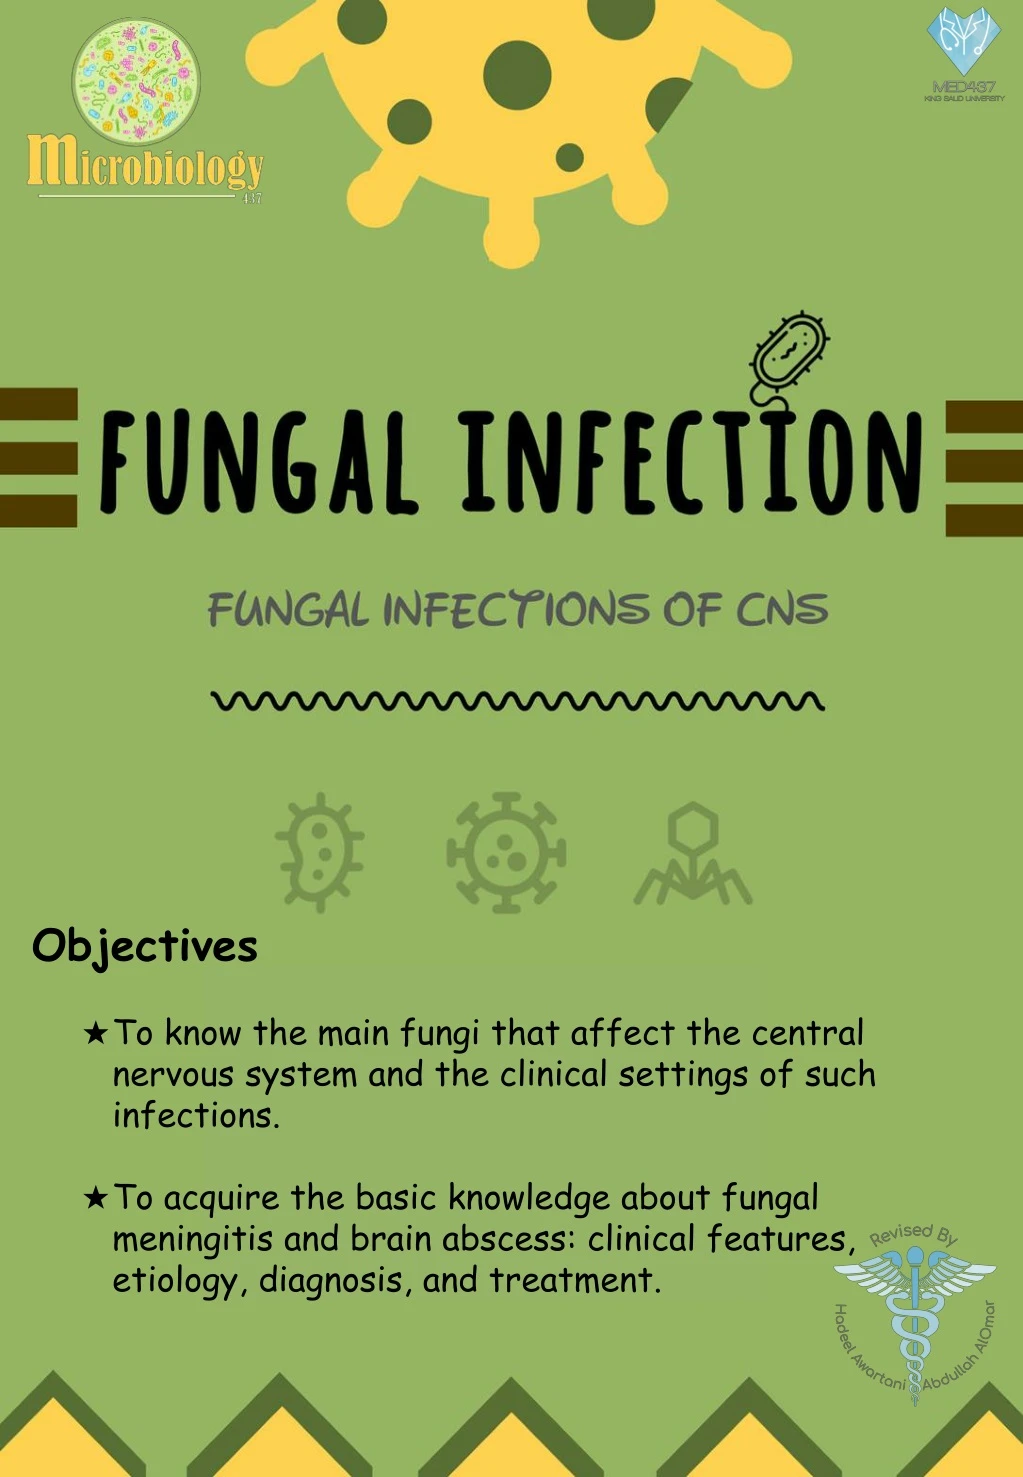 objectives to know the main fungi that affect